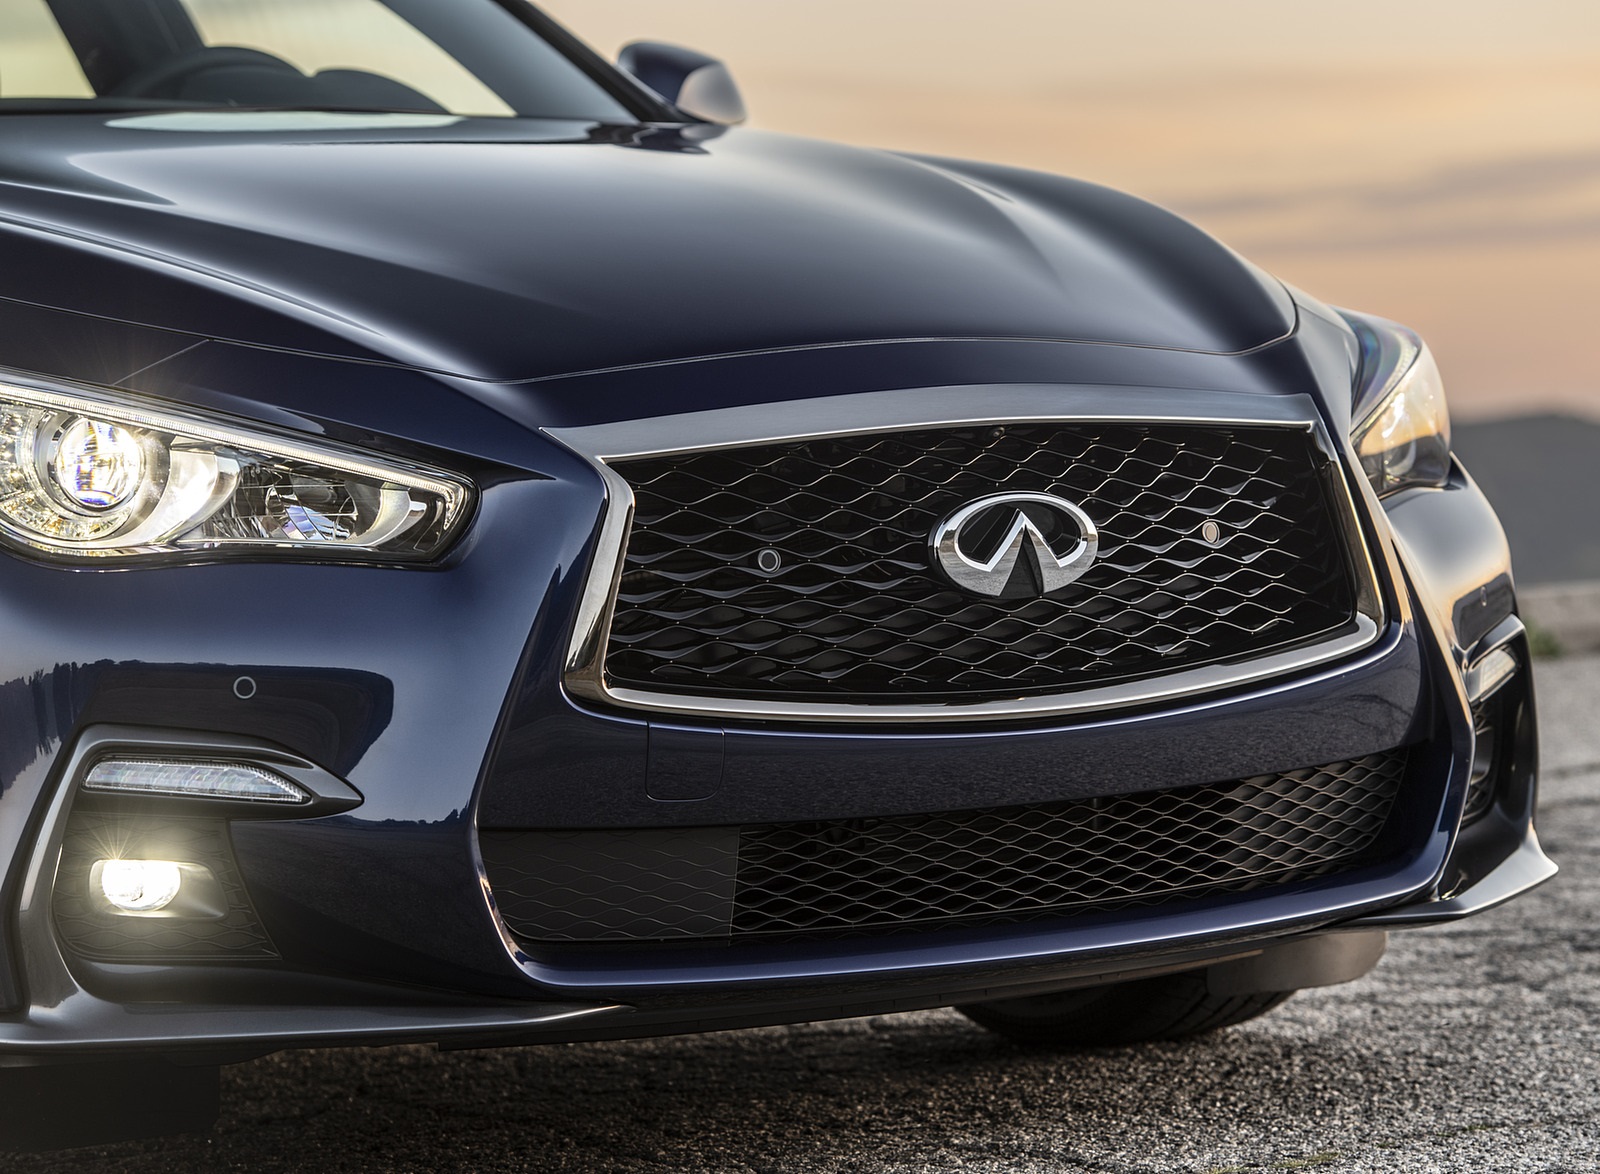 2021 Infiniti Q50 Signature Edition Front Wallpapers (9)